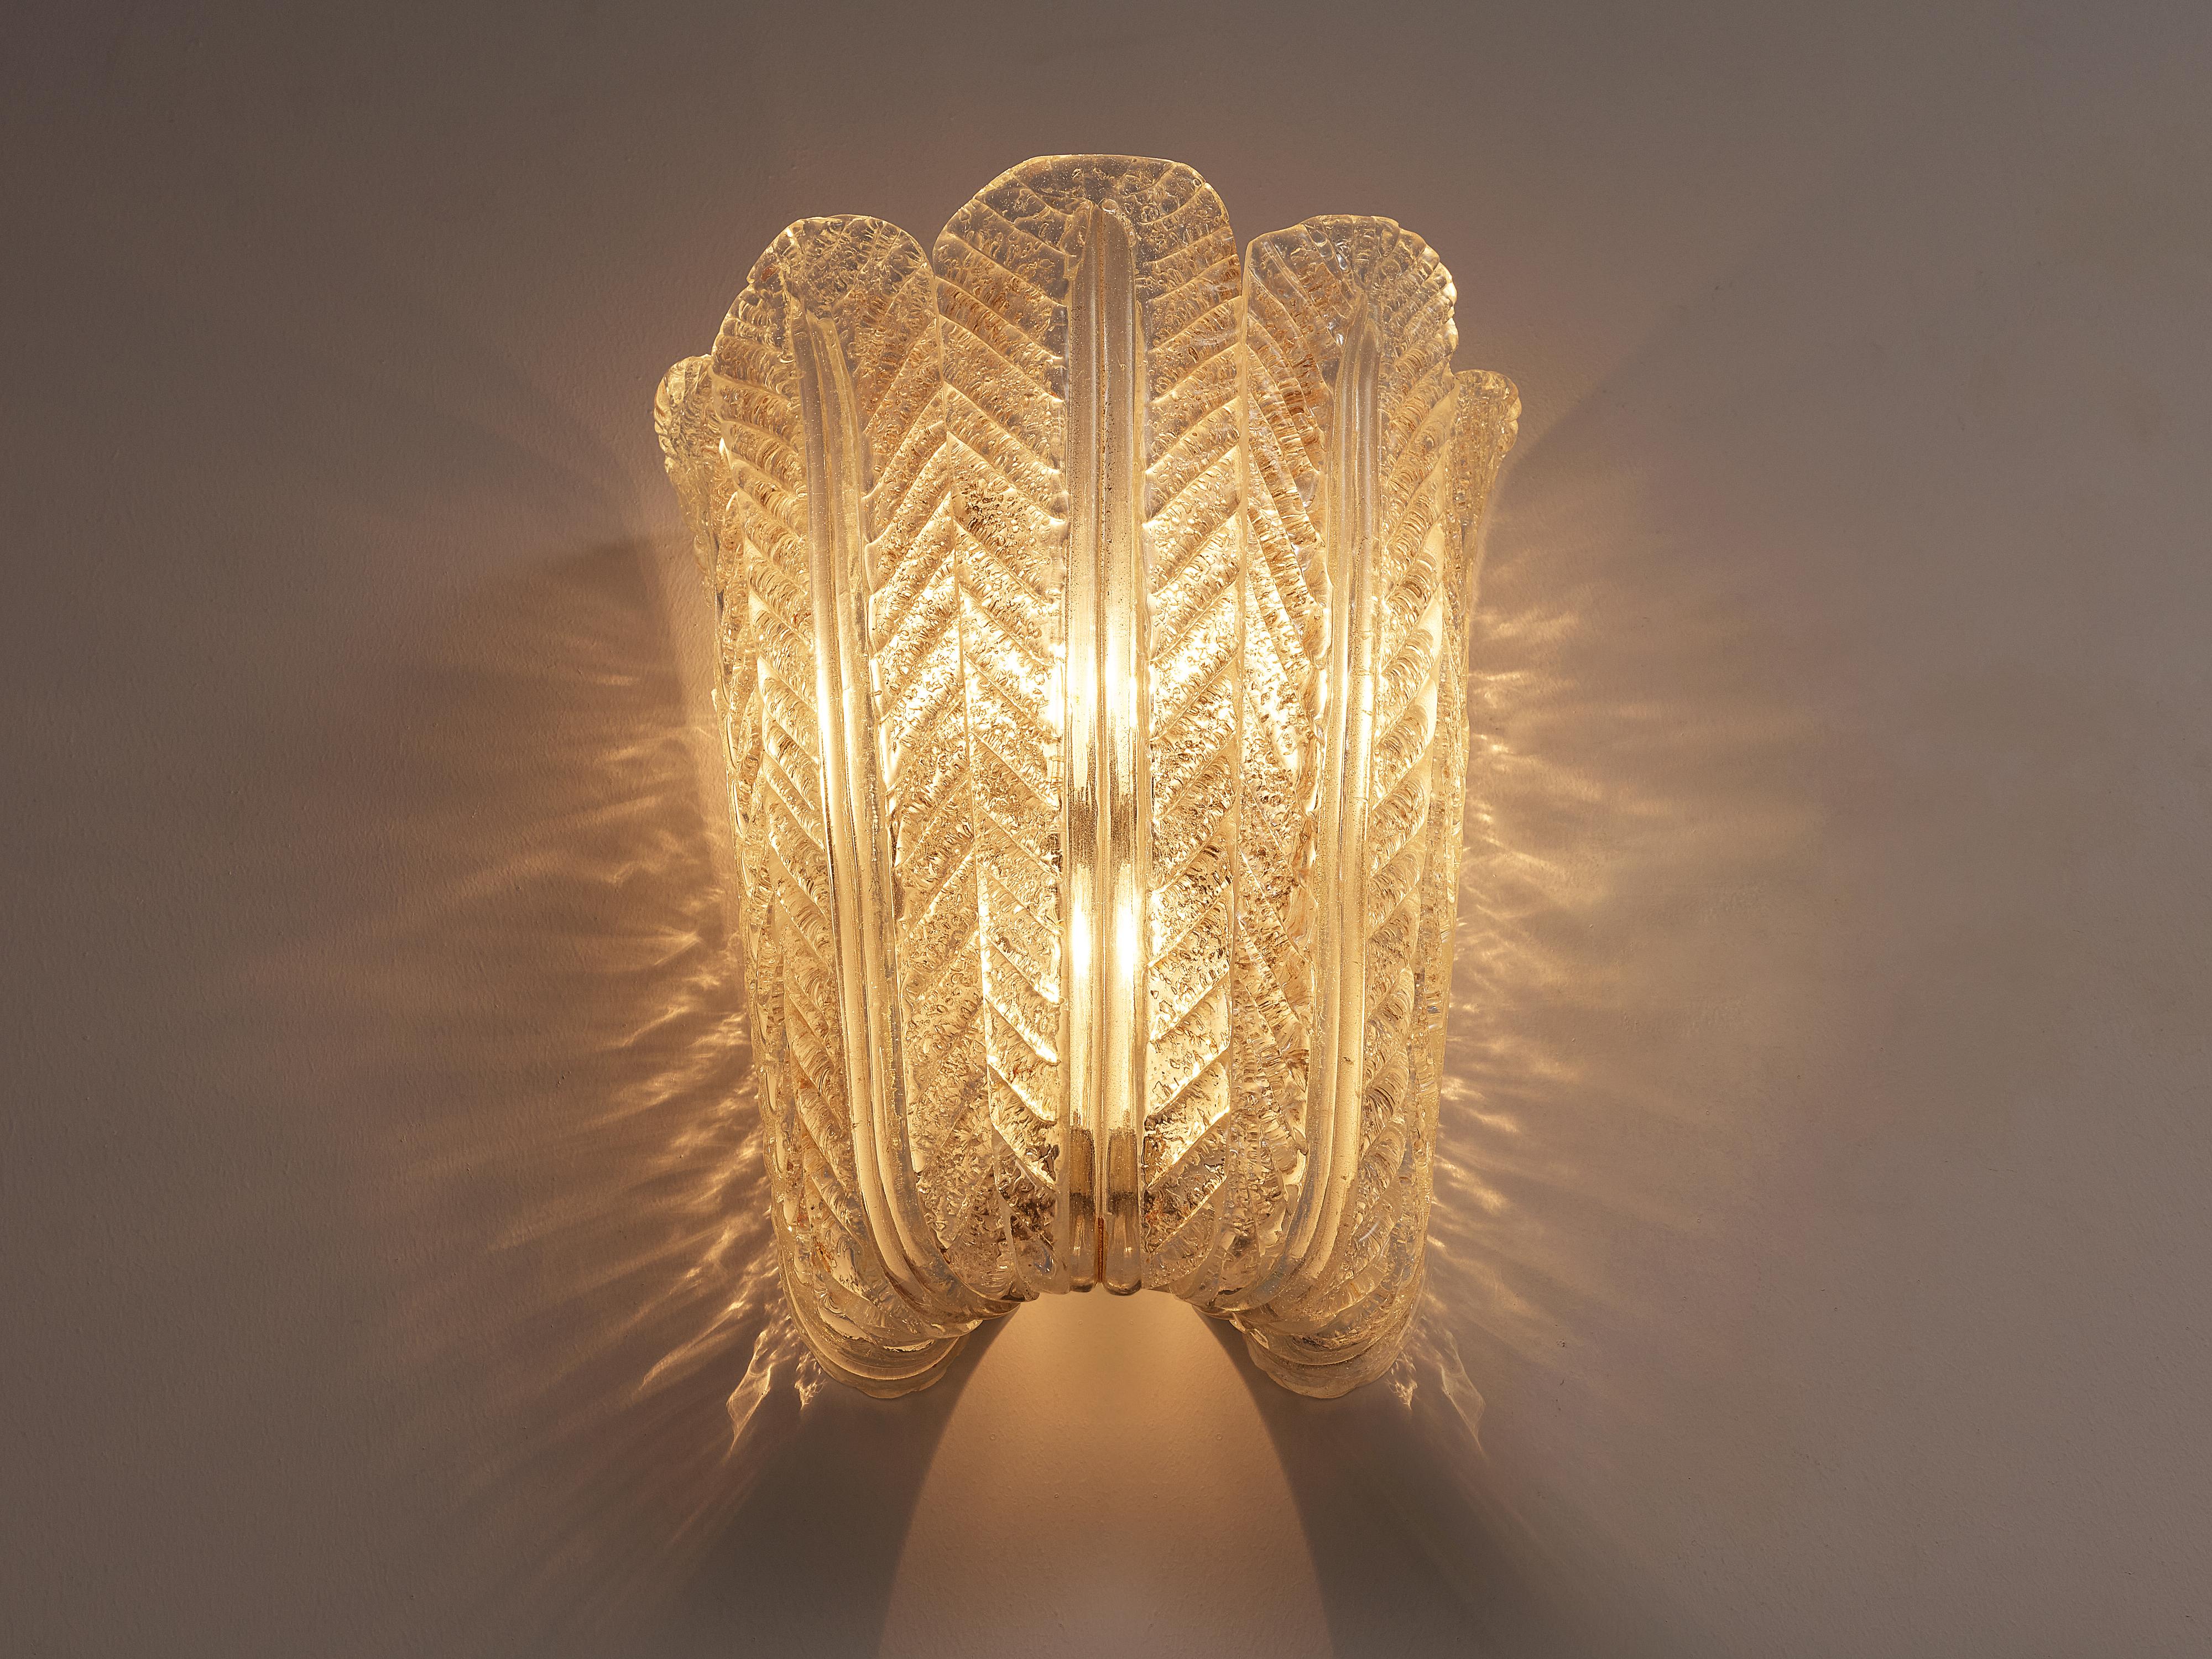 Mid-20th Century Italian Floral Wall Light in Structured Glass with Gold Leaf